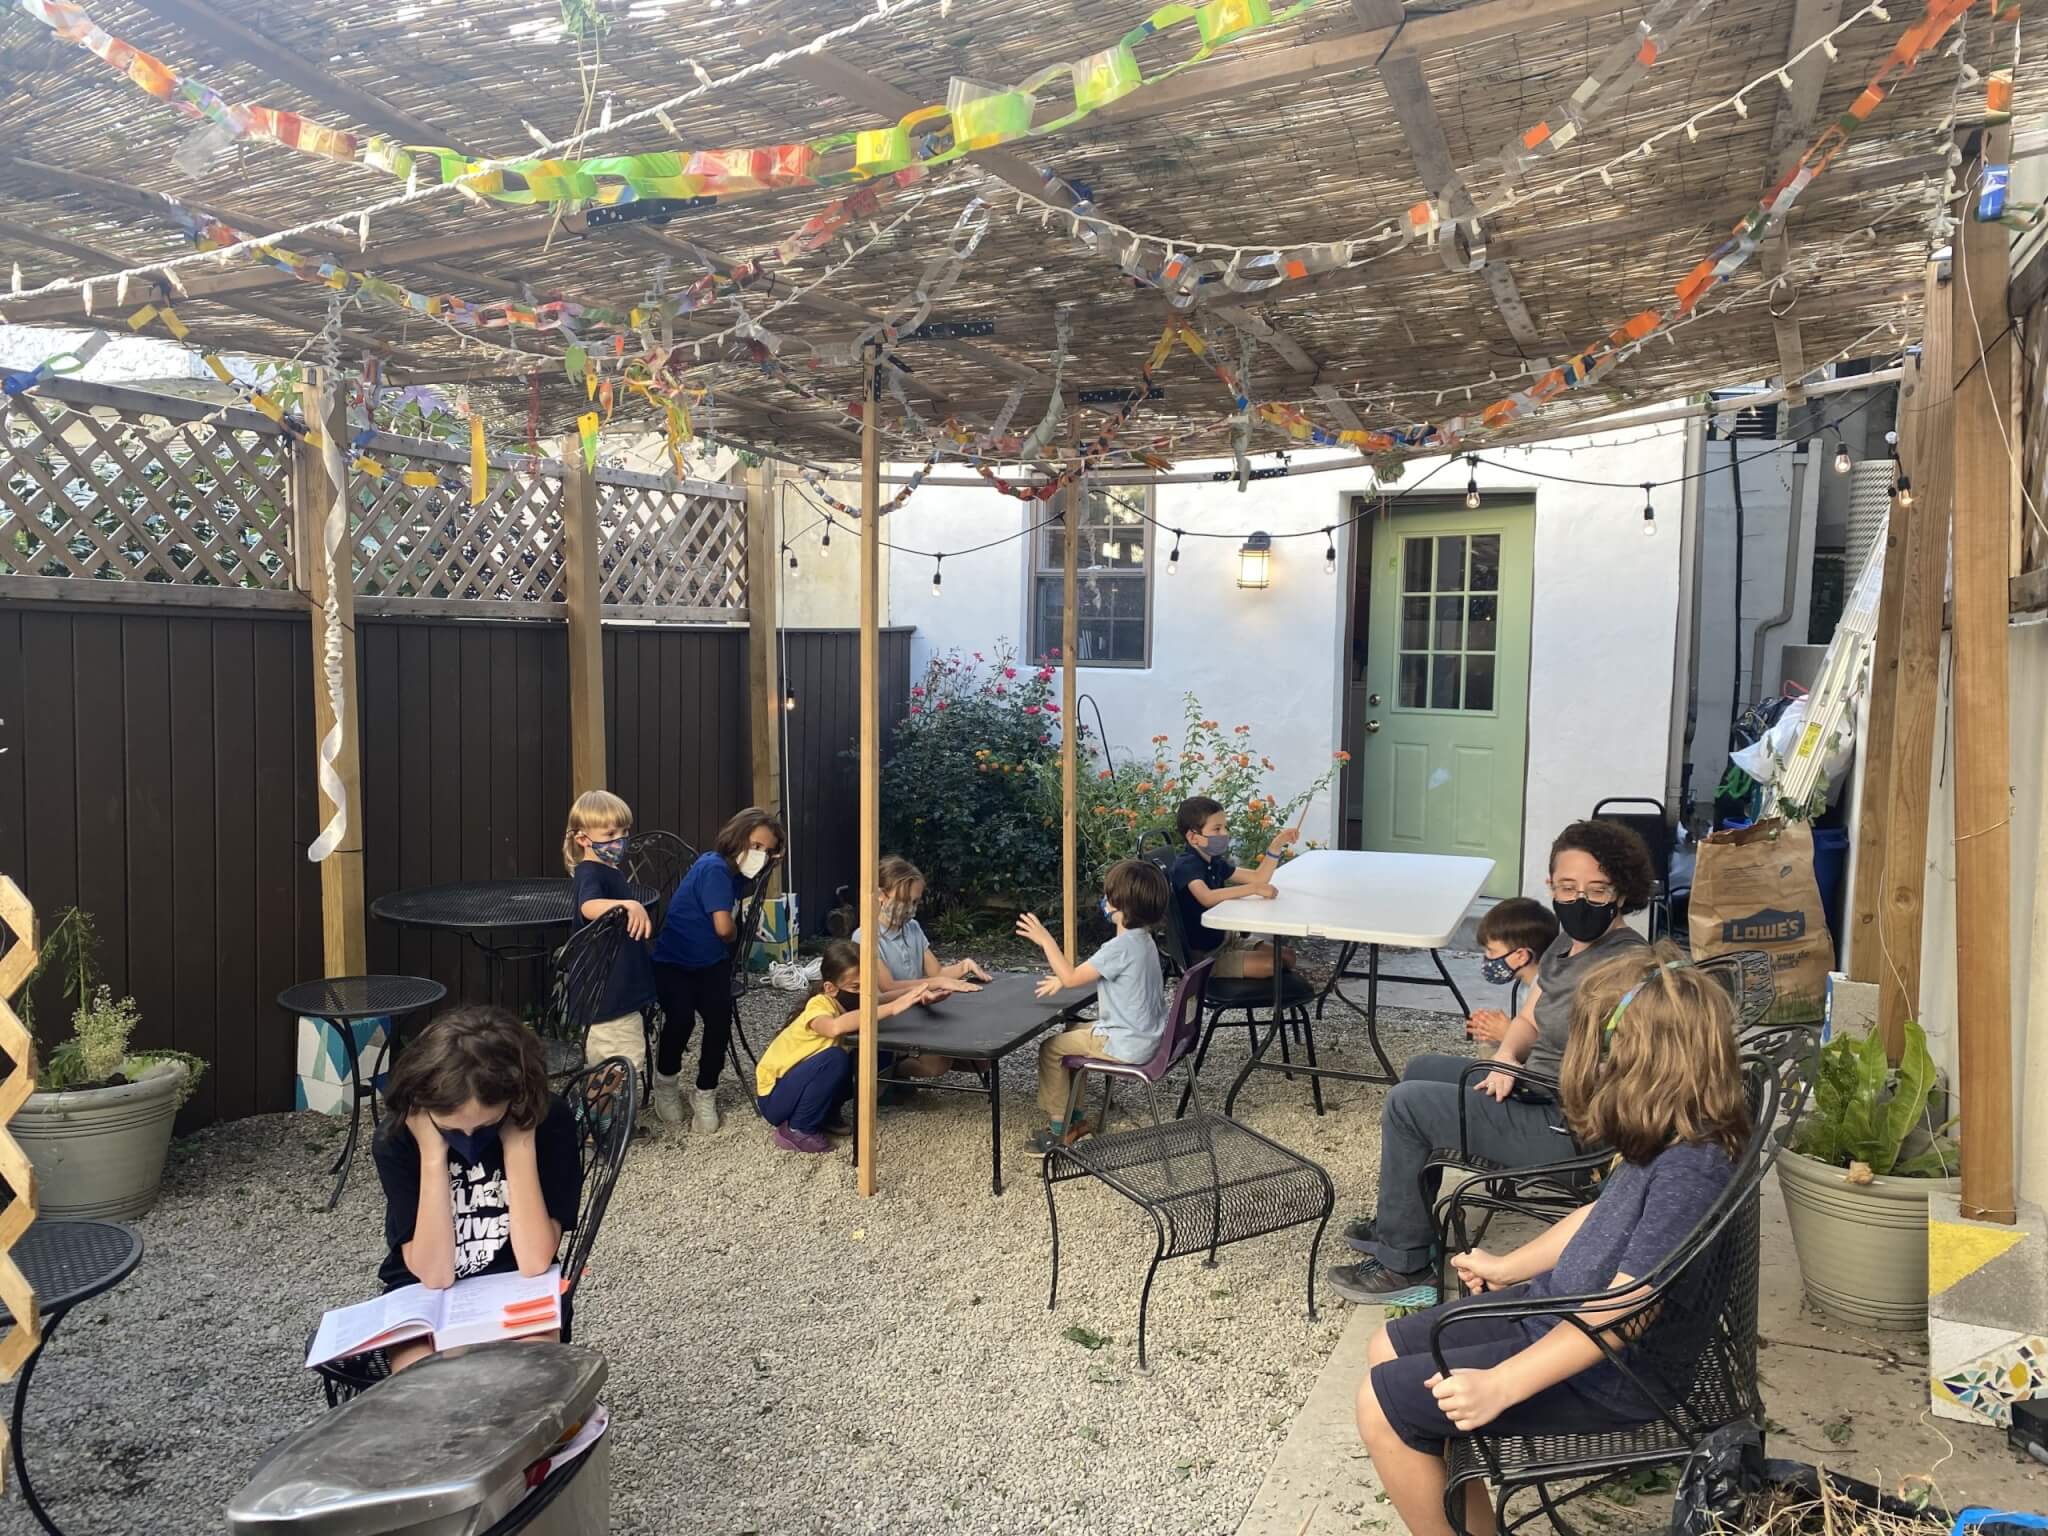 Neighbors and Strangers in the Sukkah